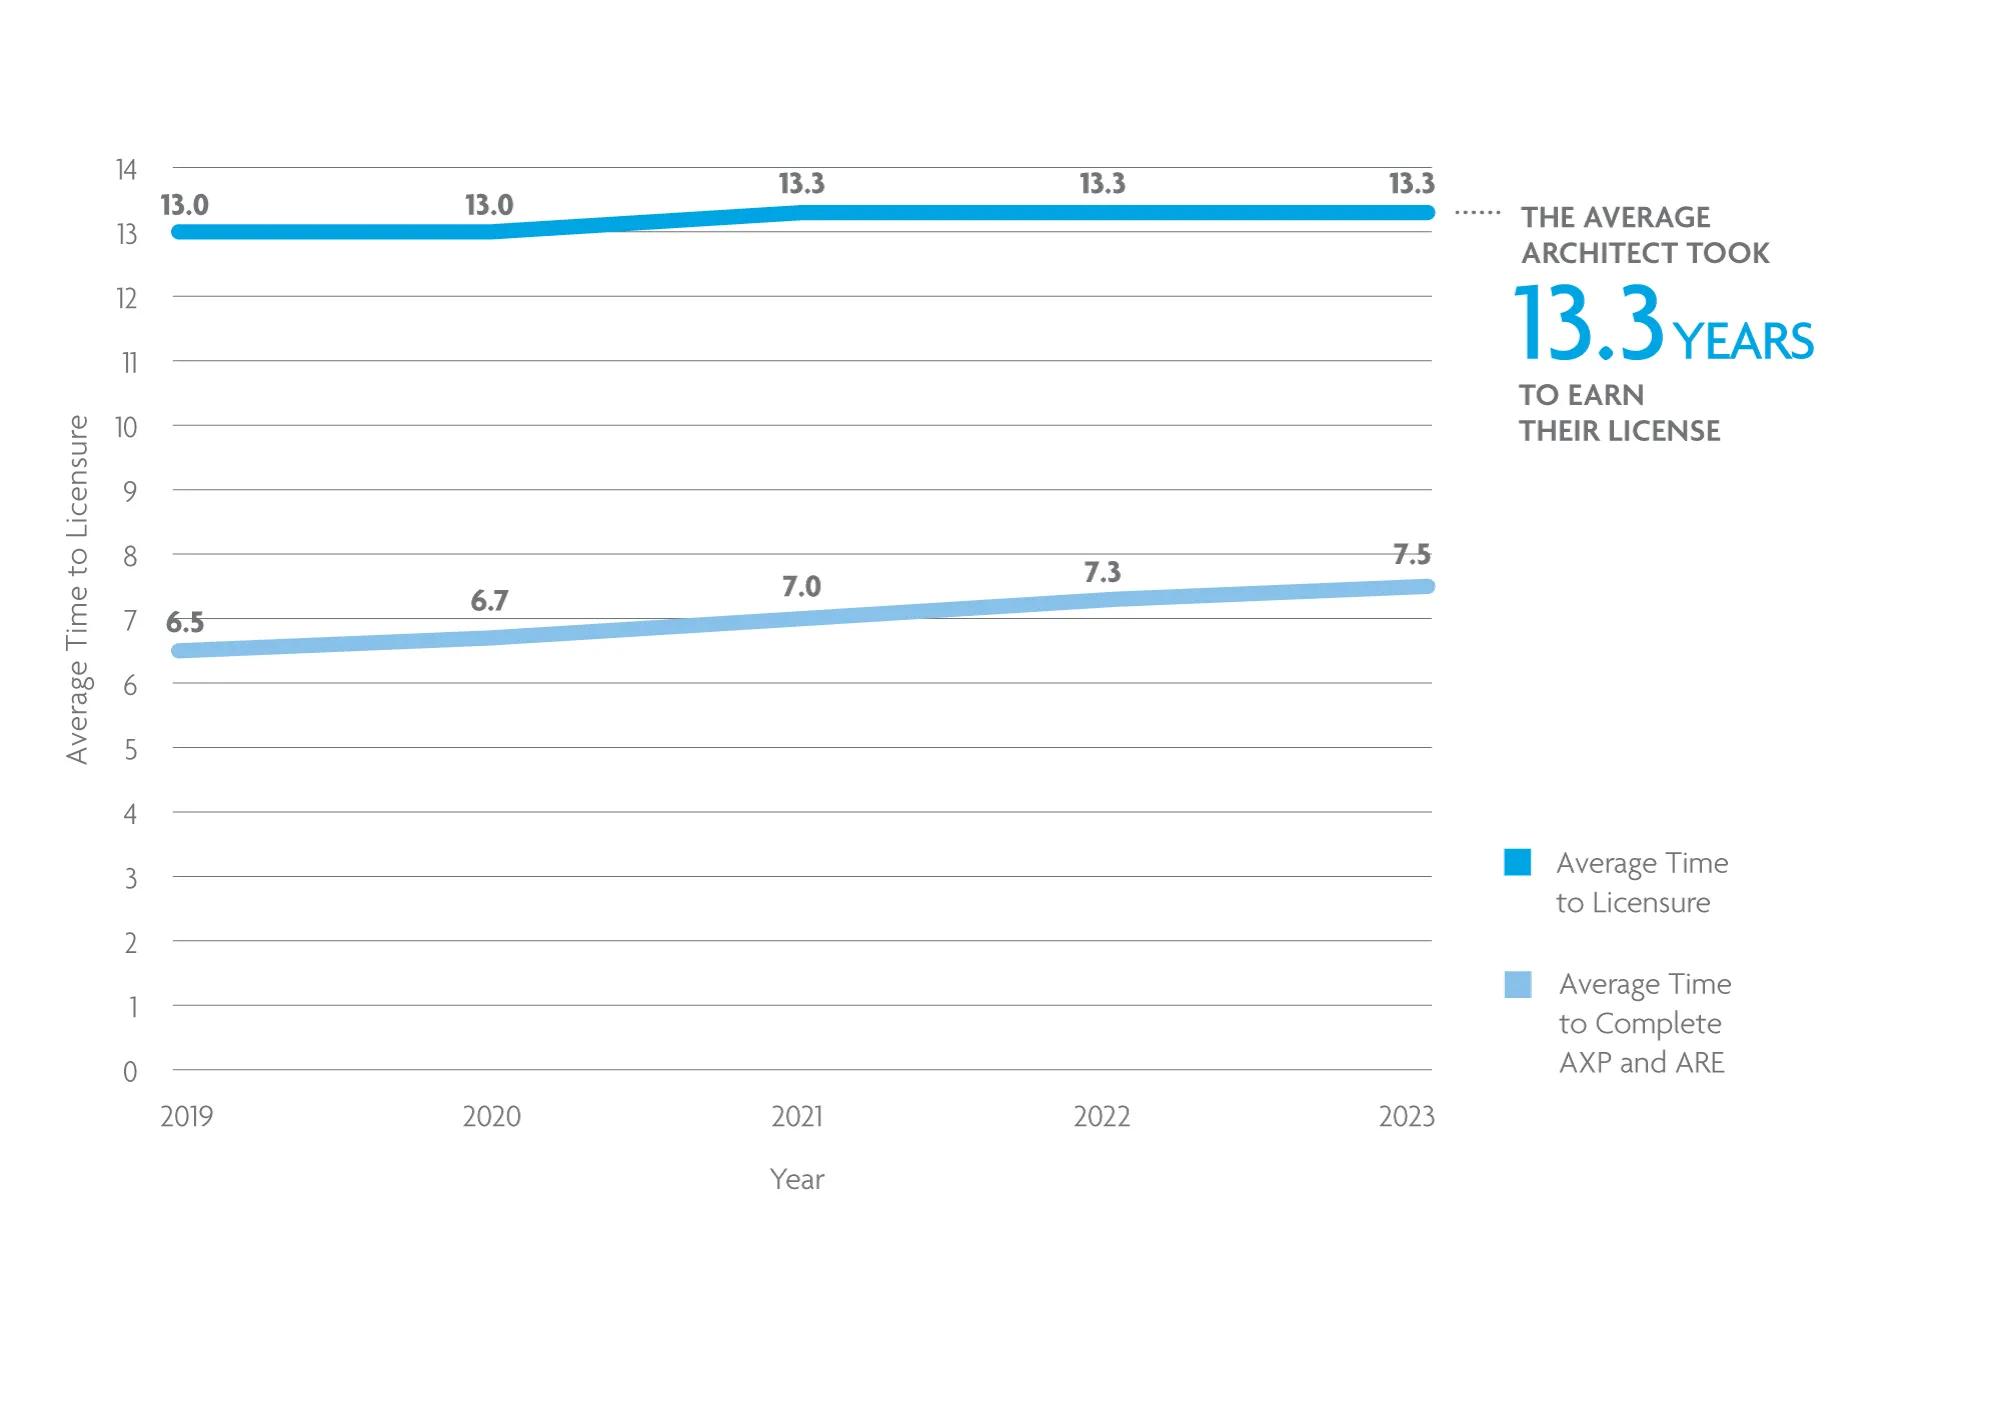 A line chart shows the average time to licensure held steady at 13.3 years in 2023.